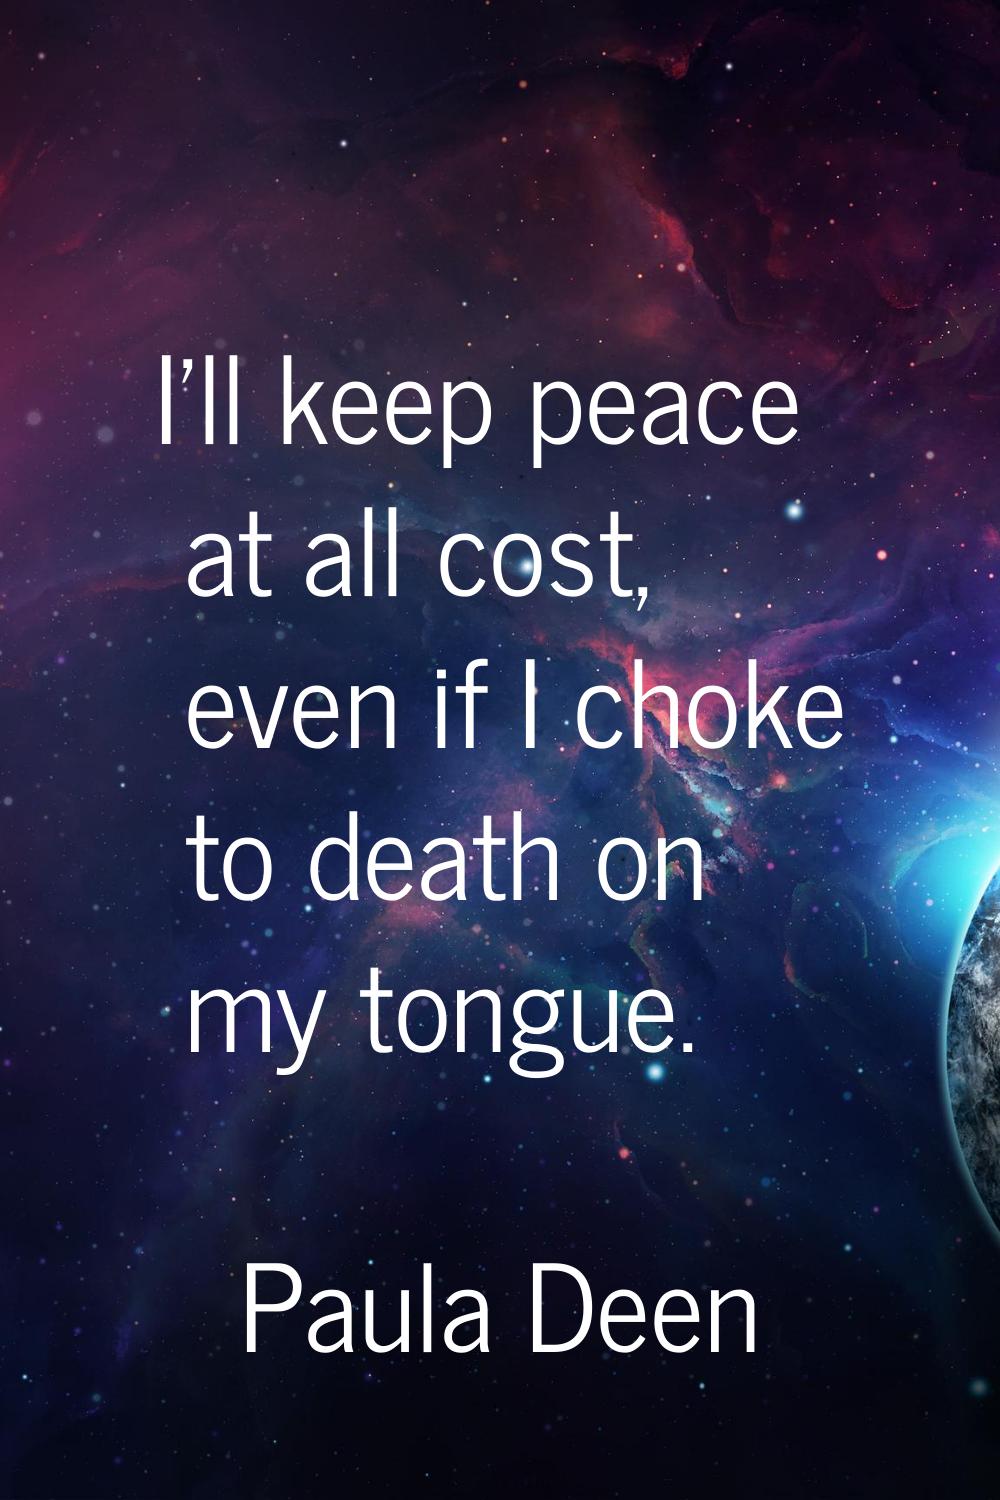 I'll keep peace at all cost, even if I choke to death on my tongue.